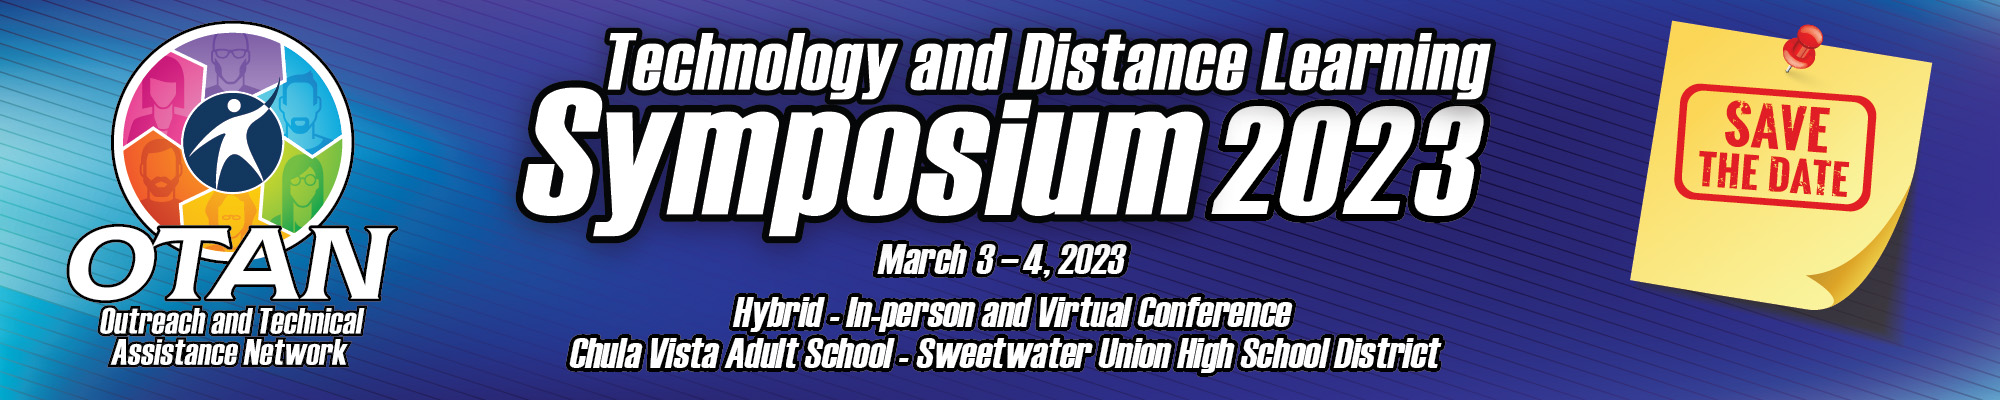 Technology and Distance Learning Symposium (TDLS) 2023. Save the Date. March 3 - 4, 2023. Hybrid - In-person and Virtual Conference. Chula Vista Adult School - Sweetwater Union High School District.